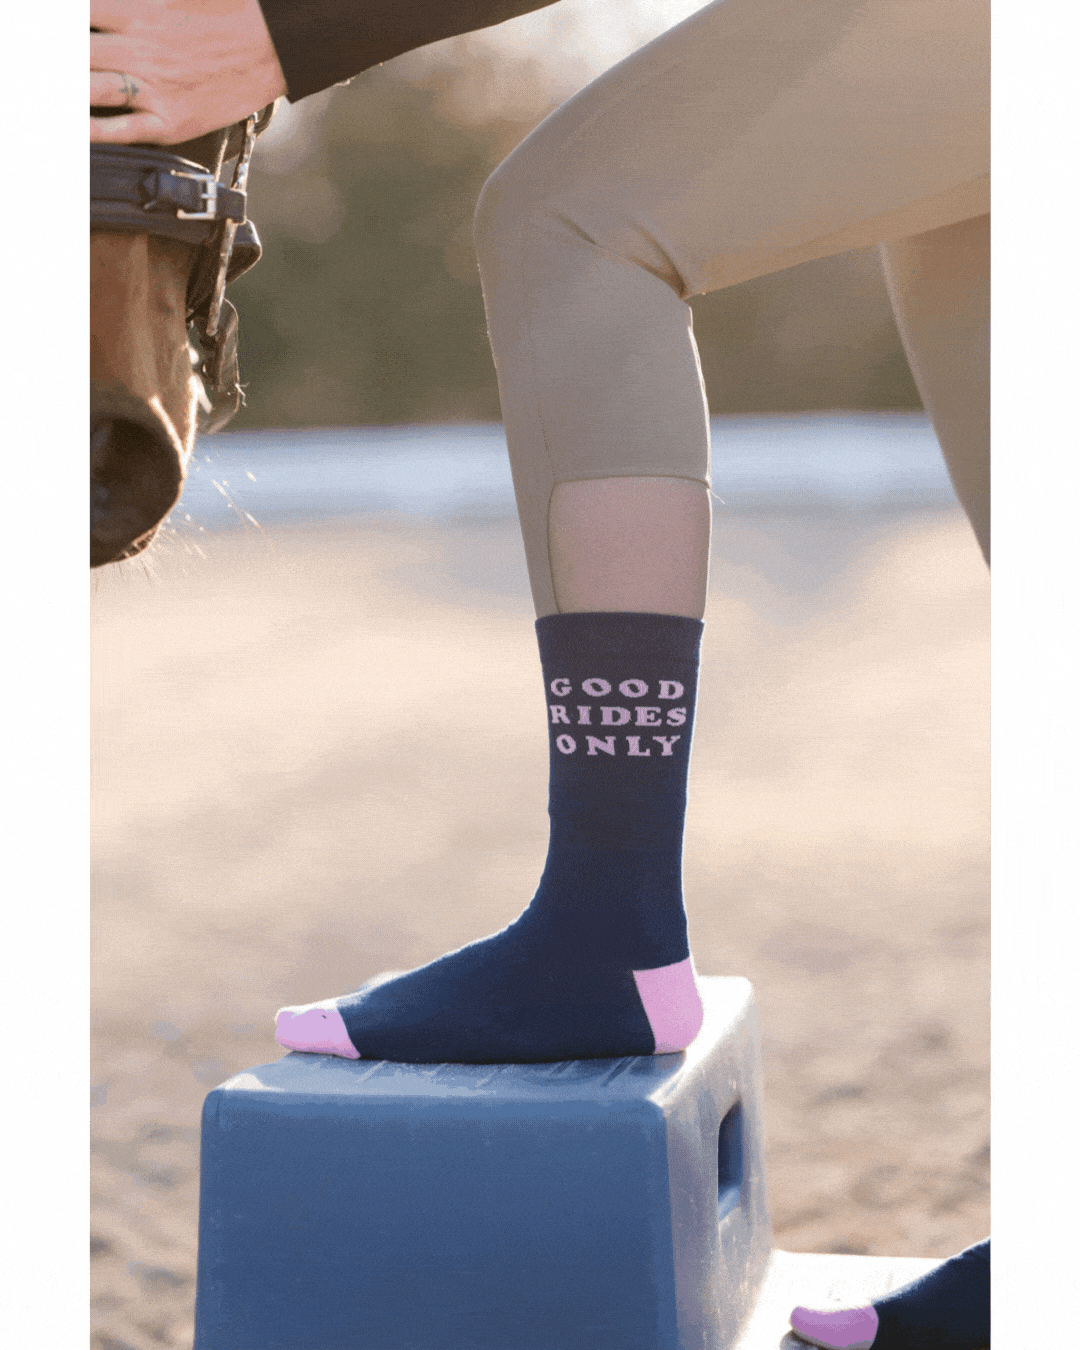 dreamers & schemers Crew Sock Good Rides Only Crew Socks equestrian boot socks boot socks thin socks riding socks pattern socks tall socks funny socks knee high socks horse socks horse show socks